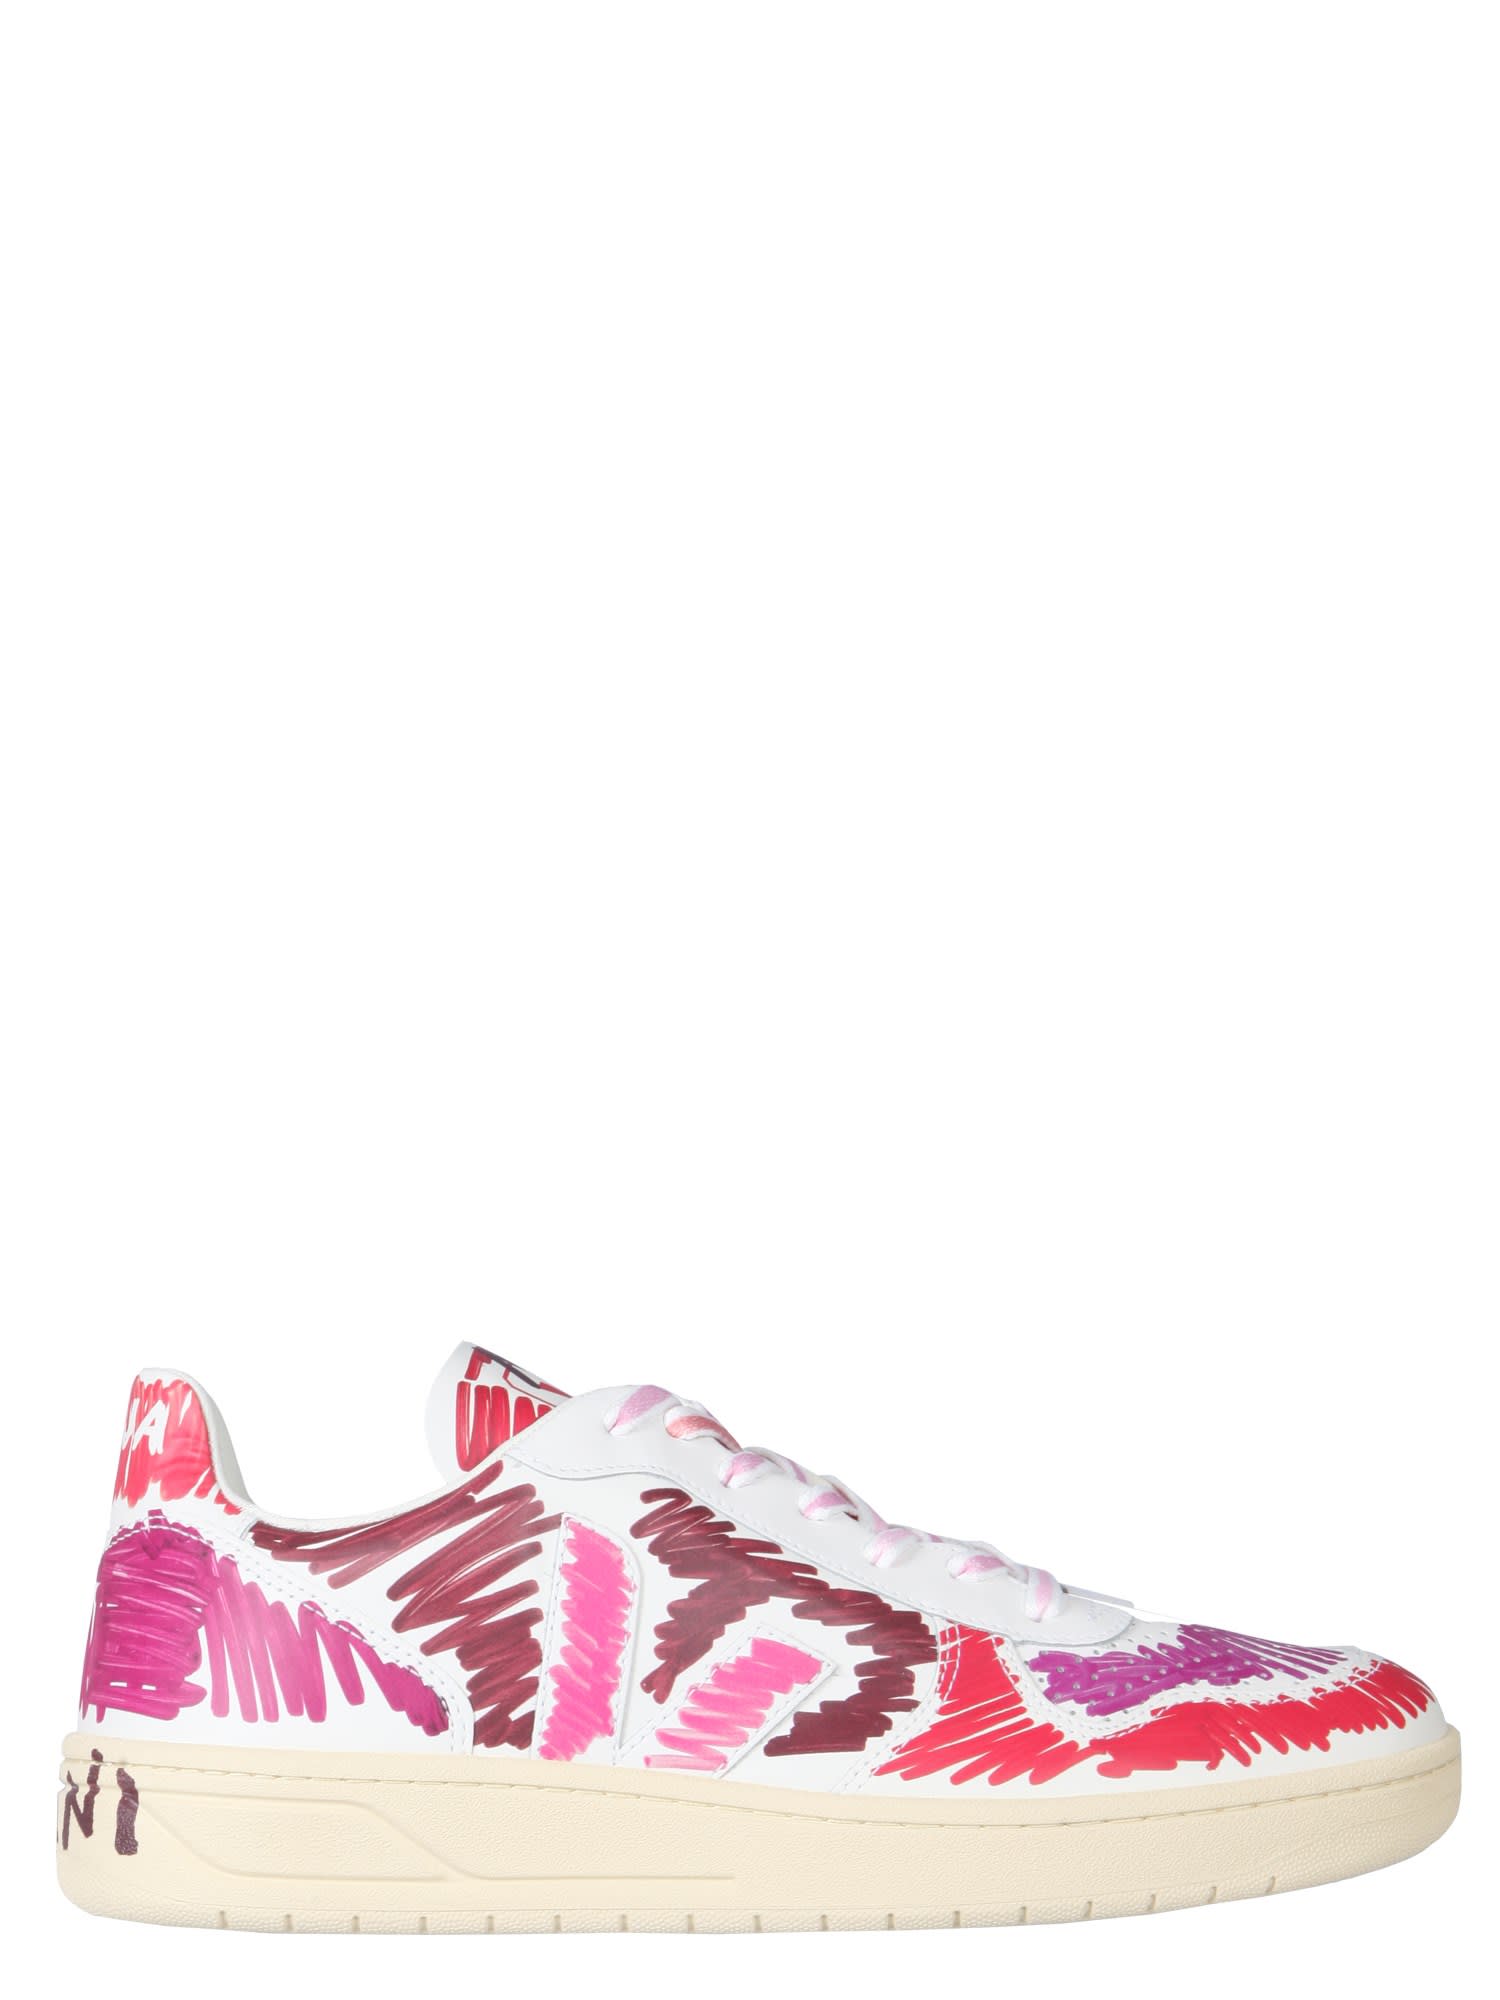 MARNI LOW TOP V-10 SNEAKERS